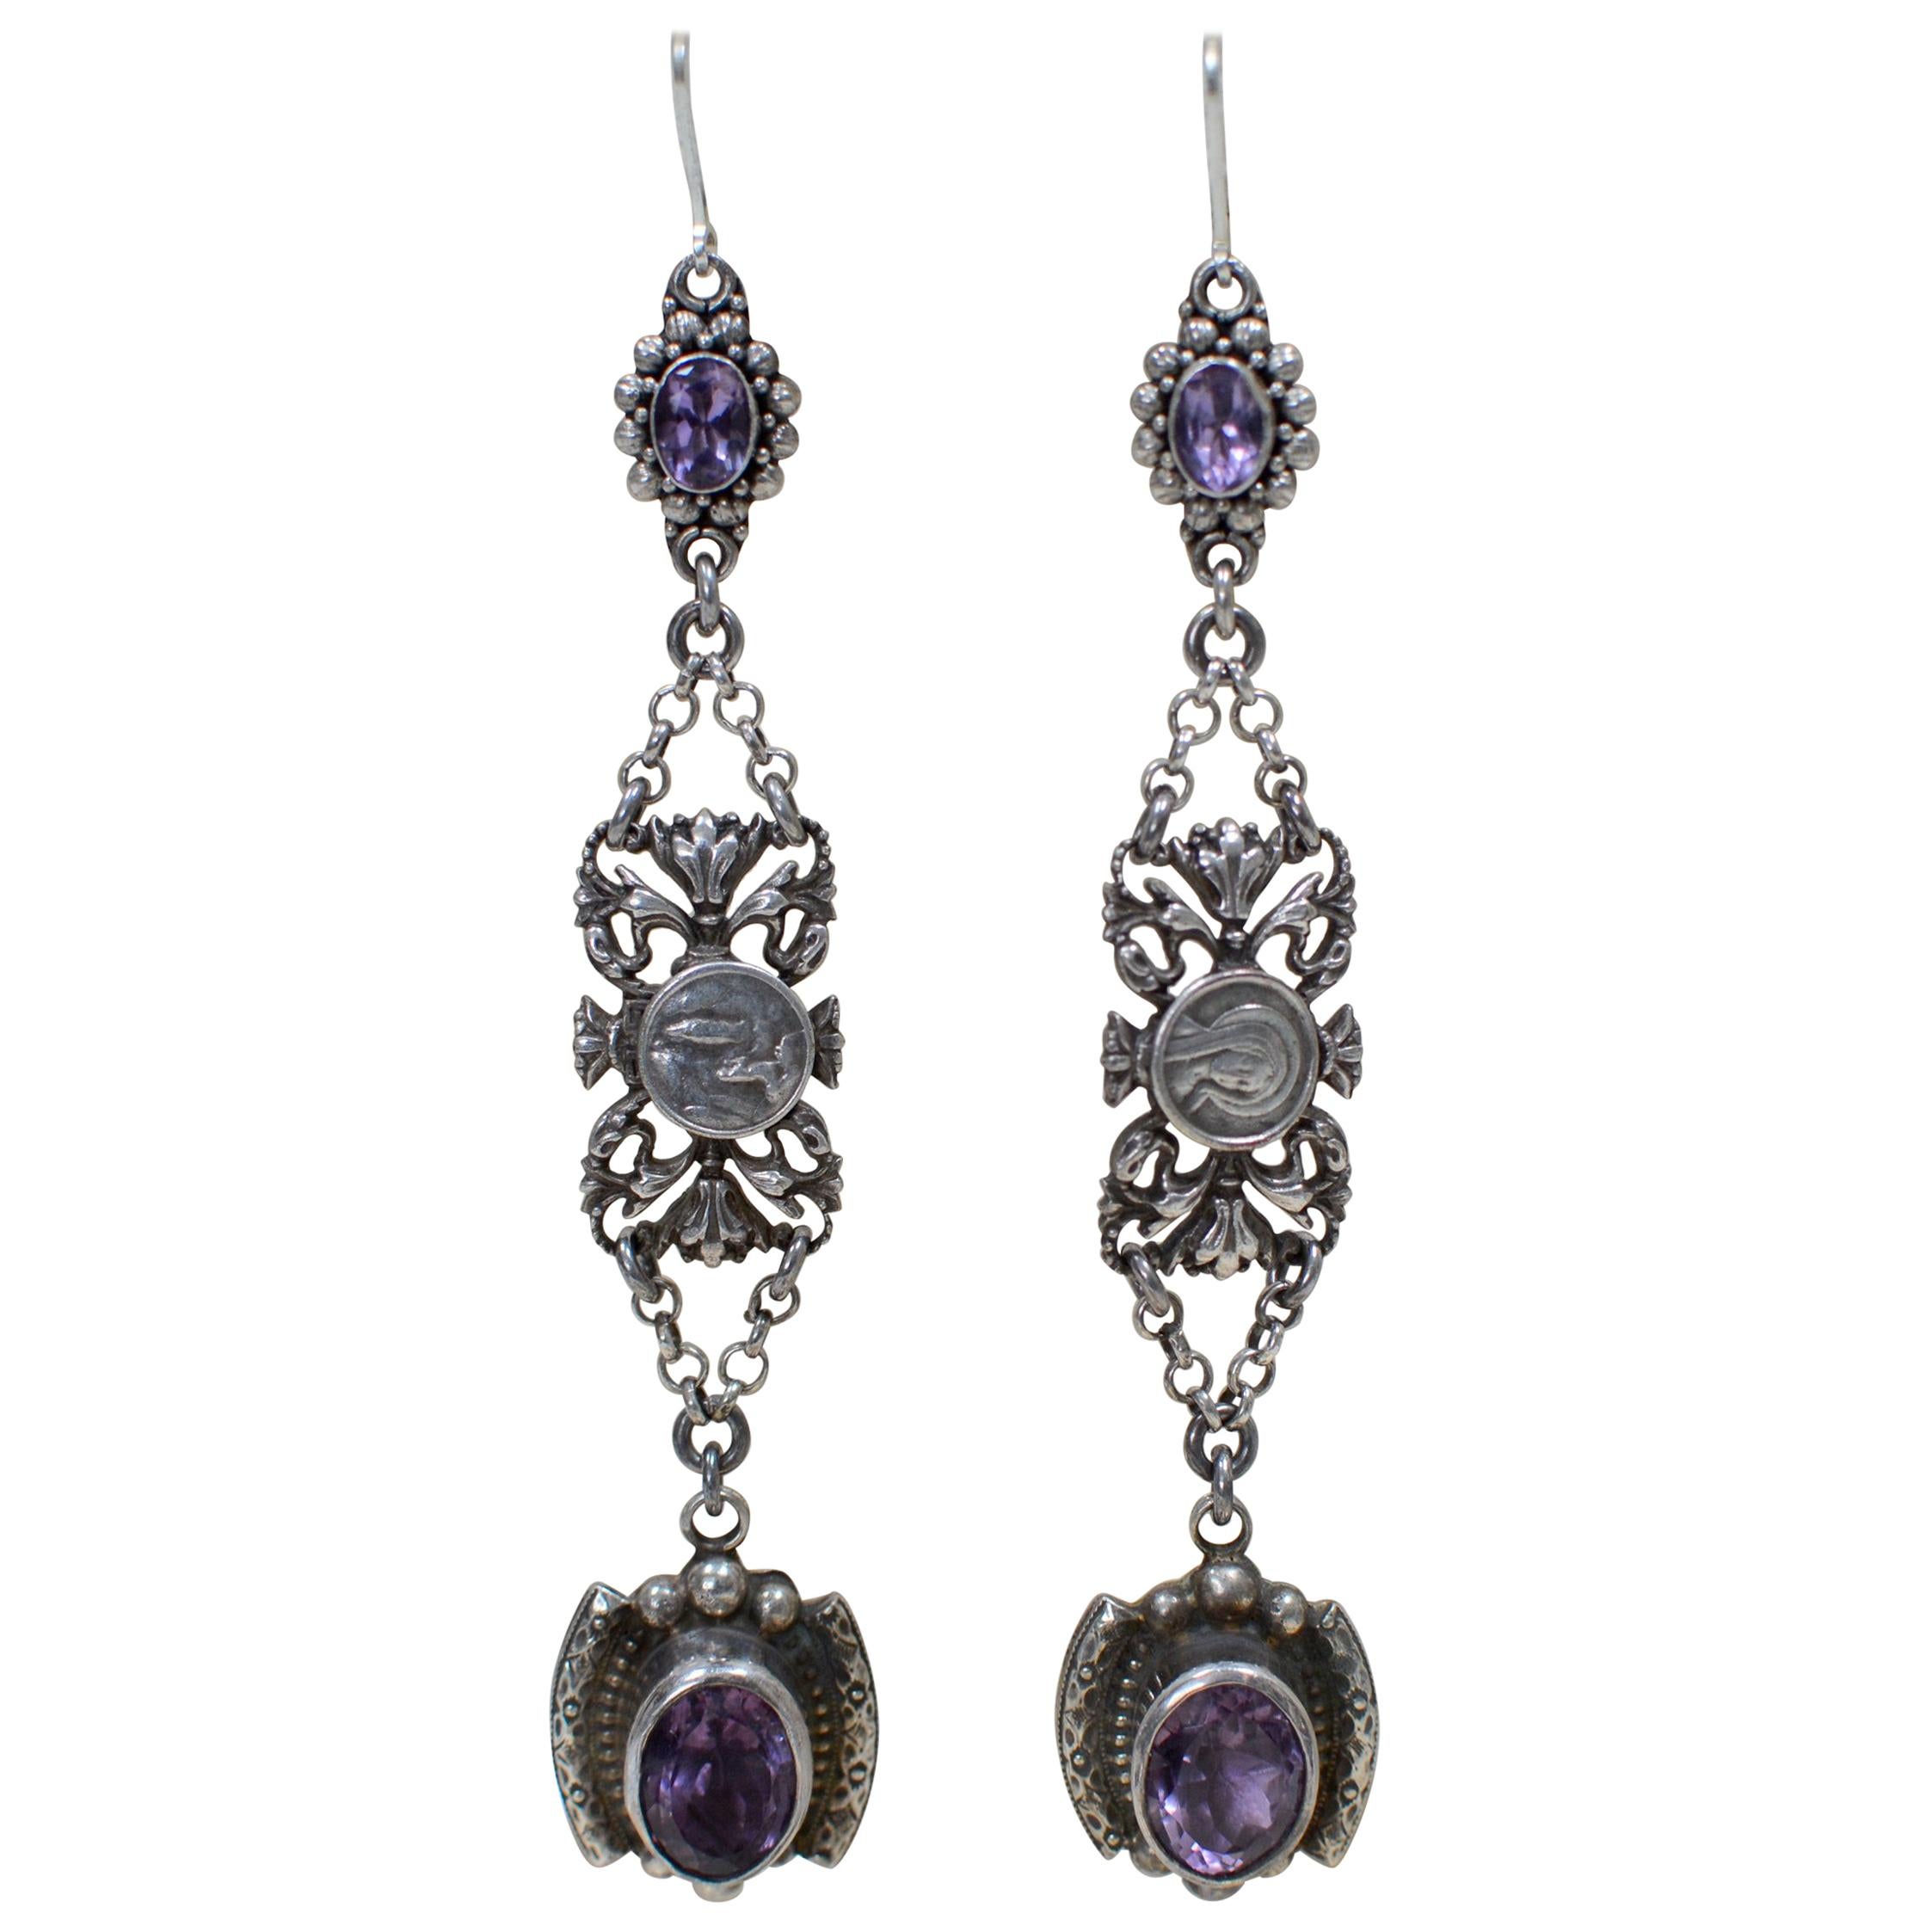 Jill Garber Amethyst Drop Earrings with Antique French Sacred Heart Medals